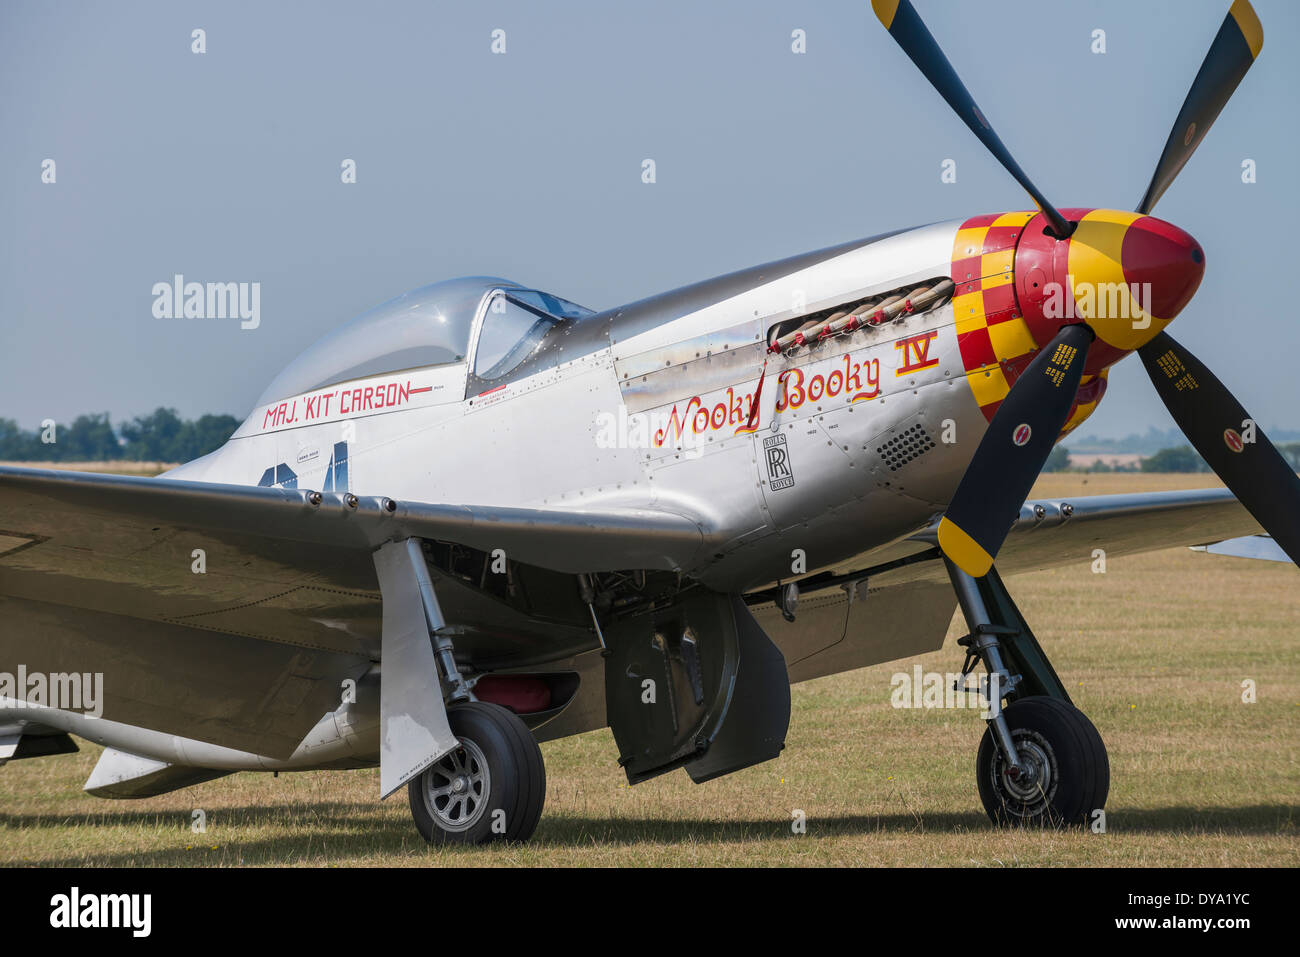 P51-D Mustang "Nooky Booky IV" bei der Imperial War Museum Duxford Flying Legends Airshow Stockfoto